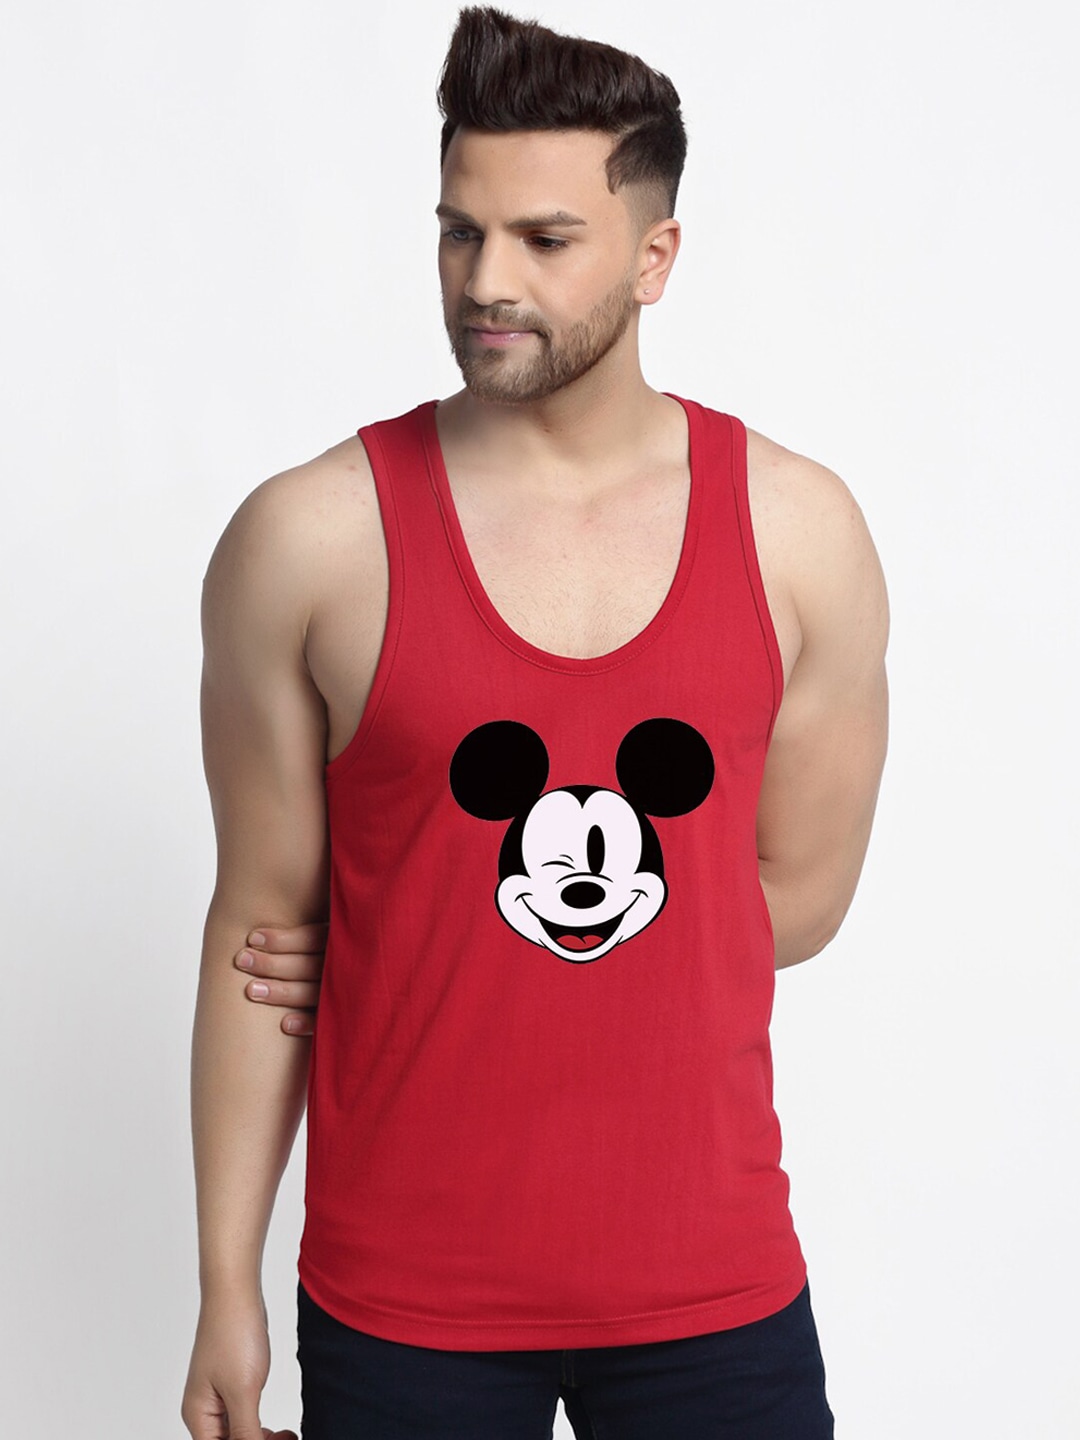 Clothing Innerwear Vests | Friskers Men Maroon & White Mickey Mouse Printed Pure Cotton Innerwear Vest - FX03846